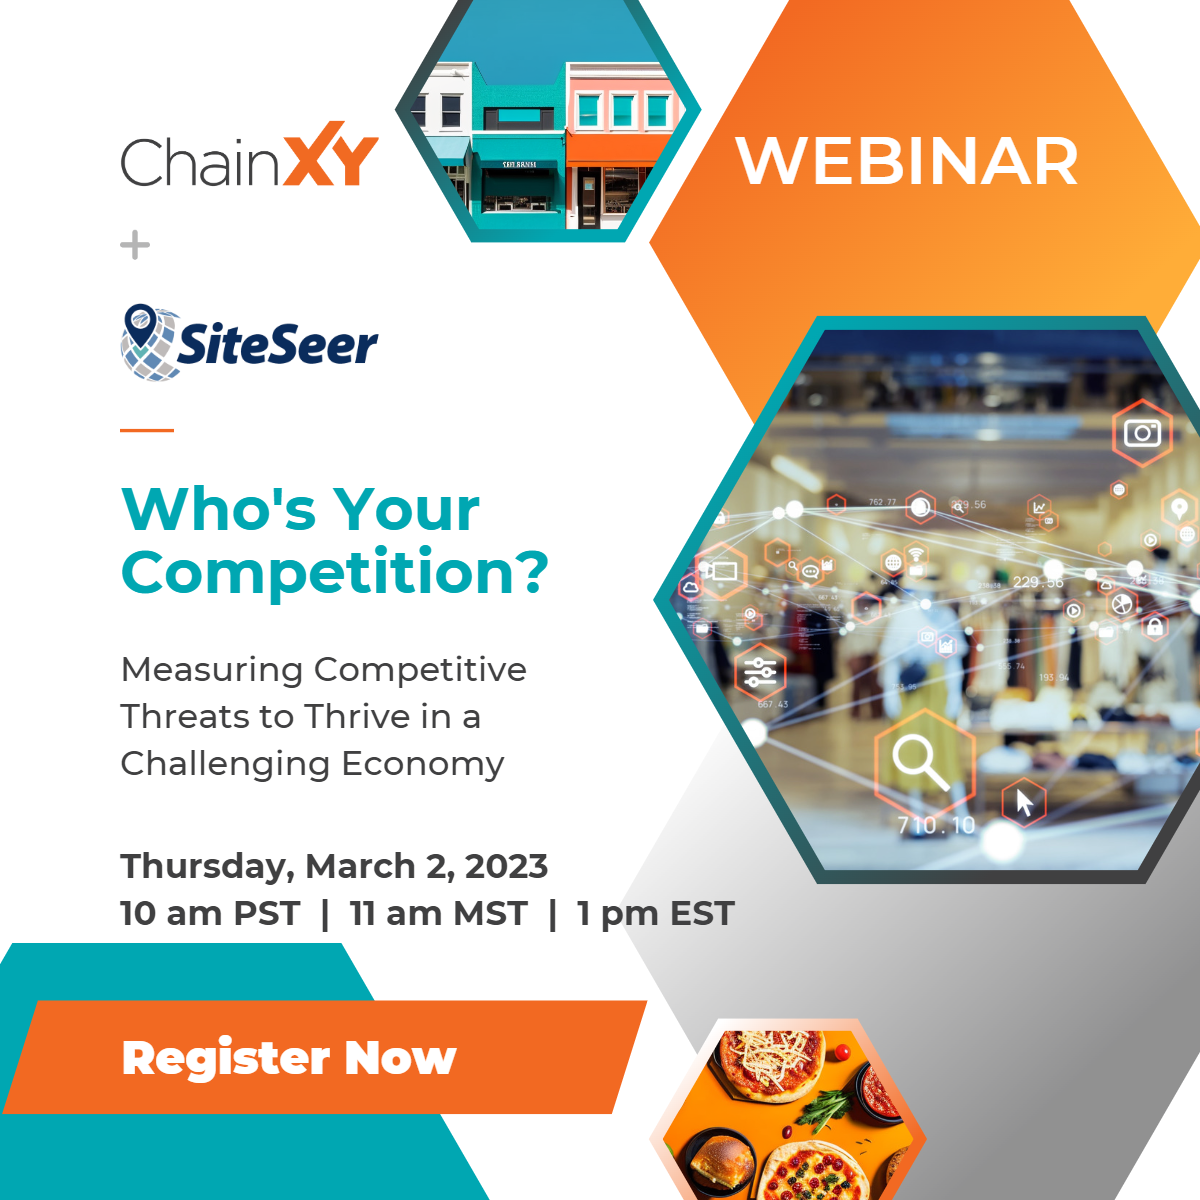 Webinar: Who's Your Competition? Measuring Competitive Threats to Thrive in a Challenging Economy